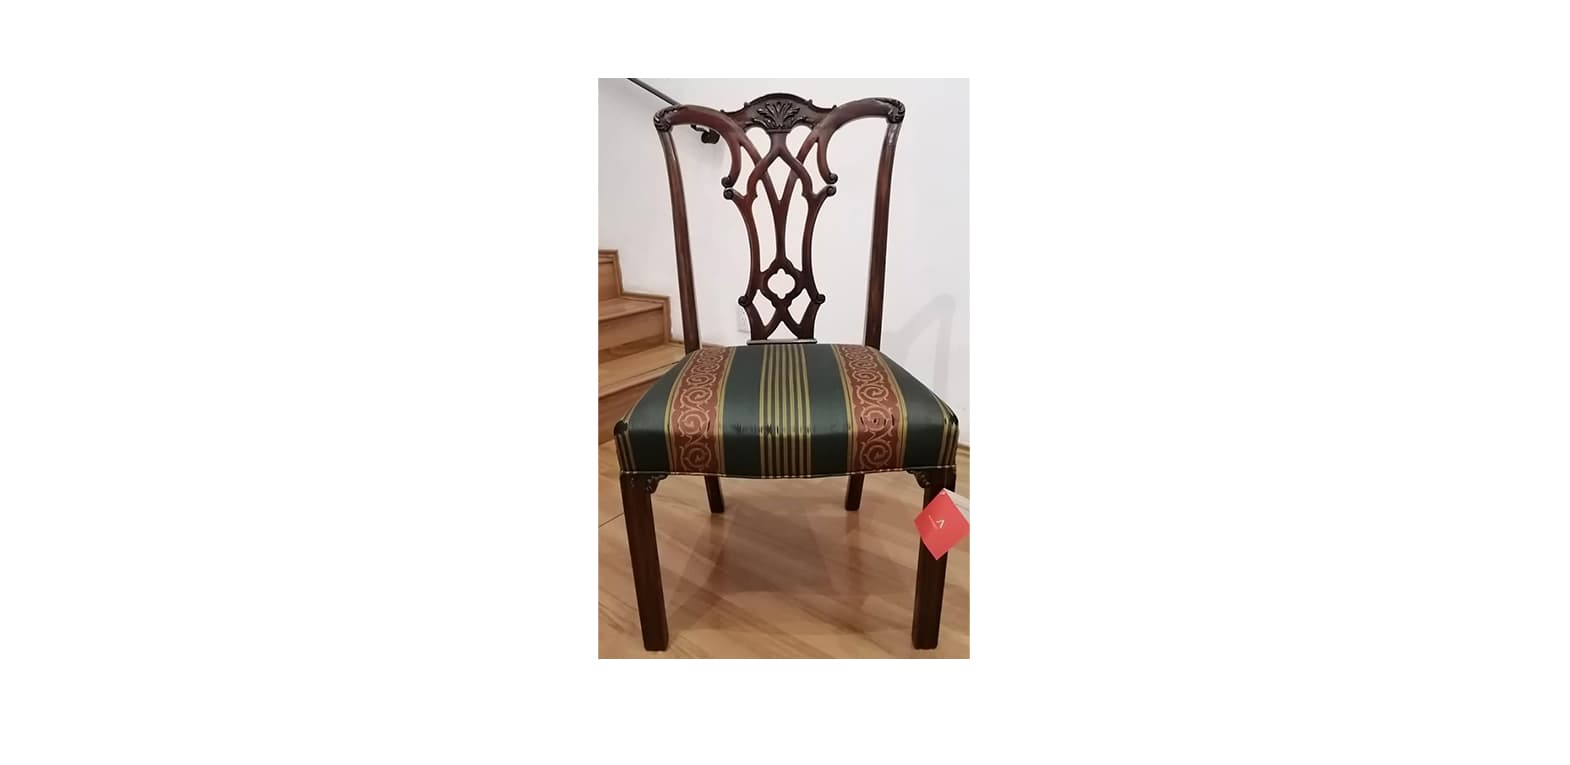 CHAPWELL CHAIR